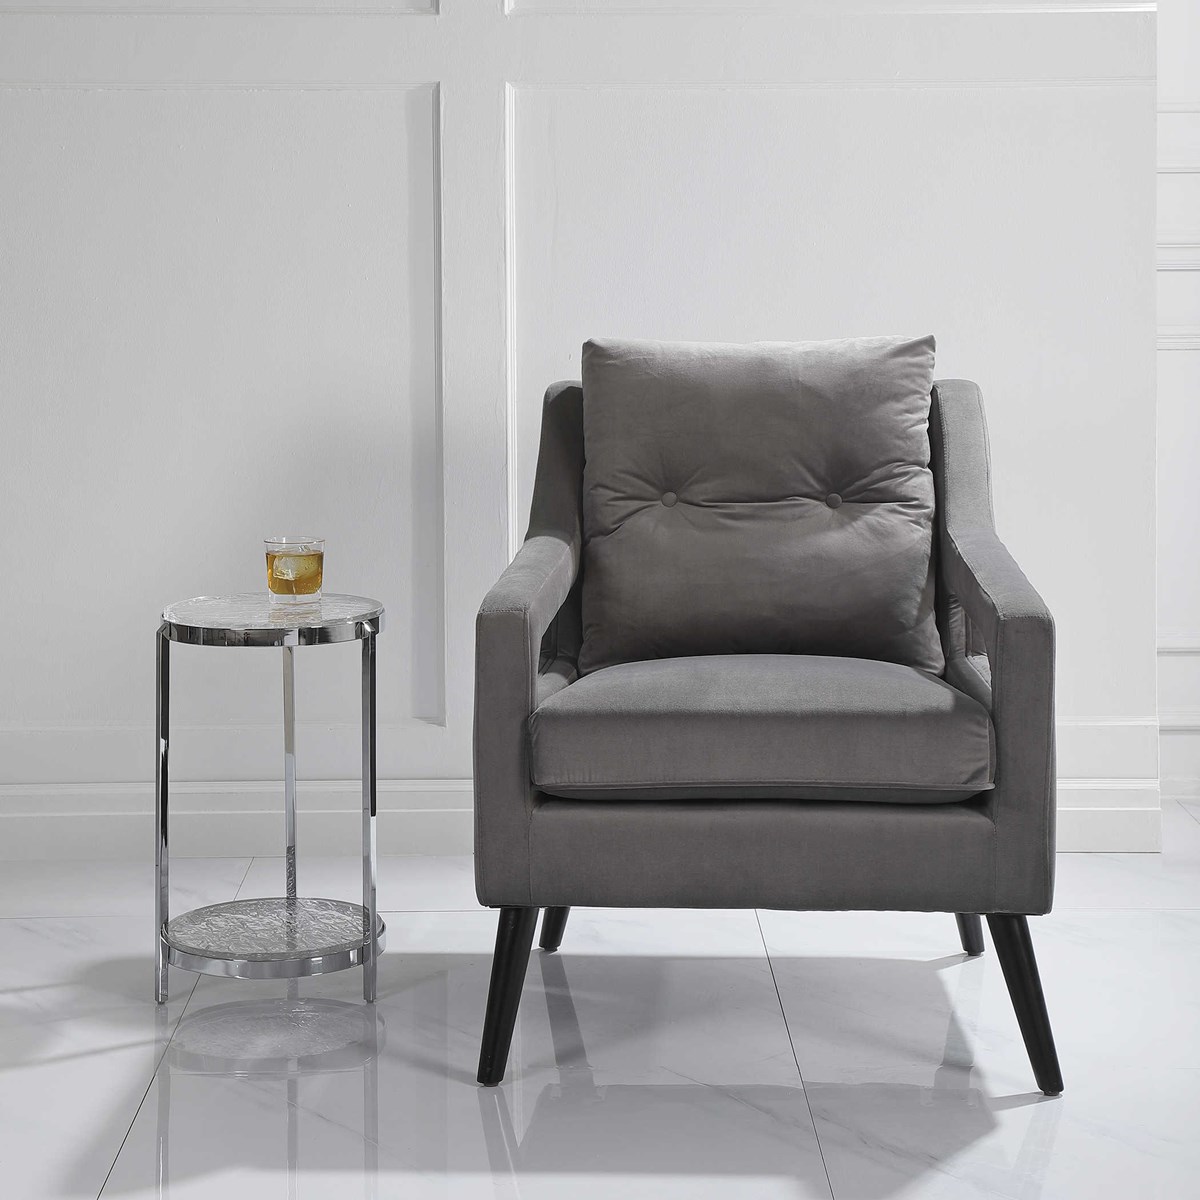 Picture of 212 Main 23583 36.5 x 30 x 27.5 in. OBrien Gray Armchair